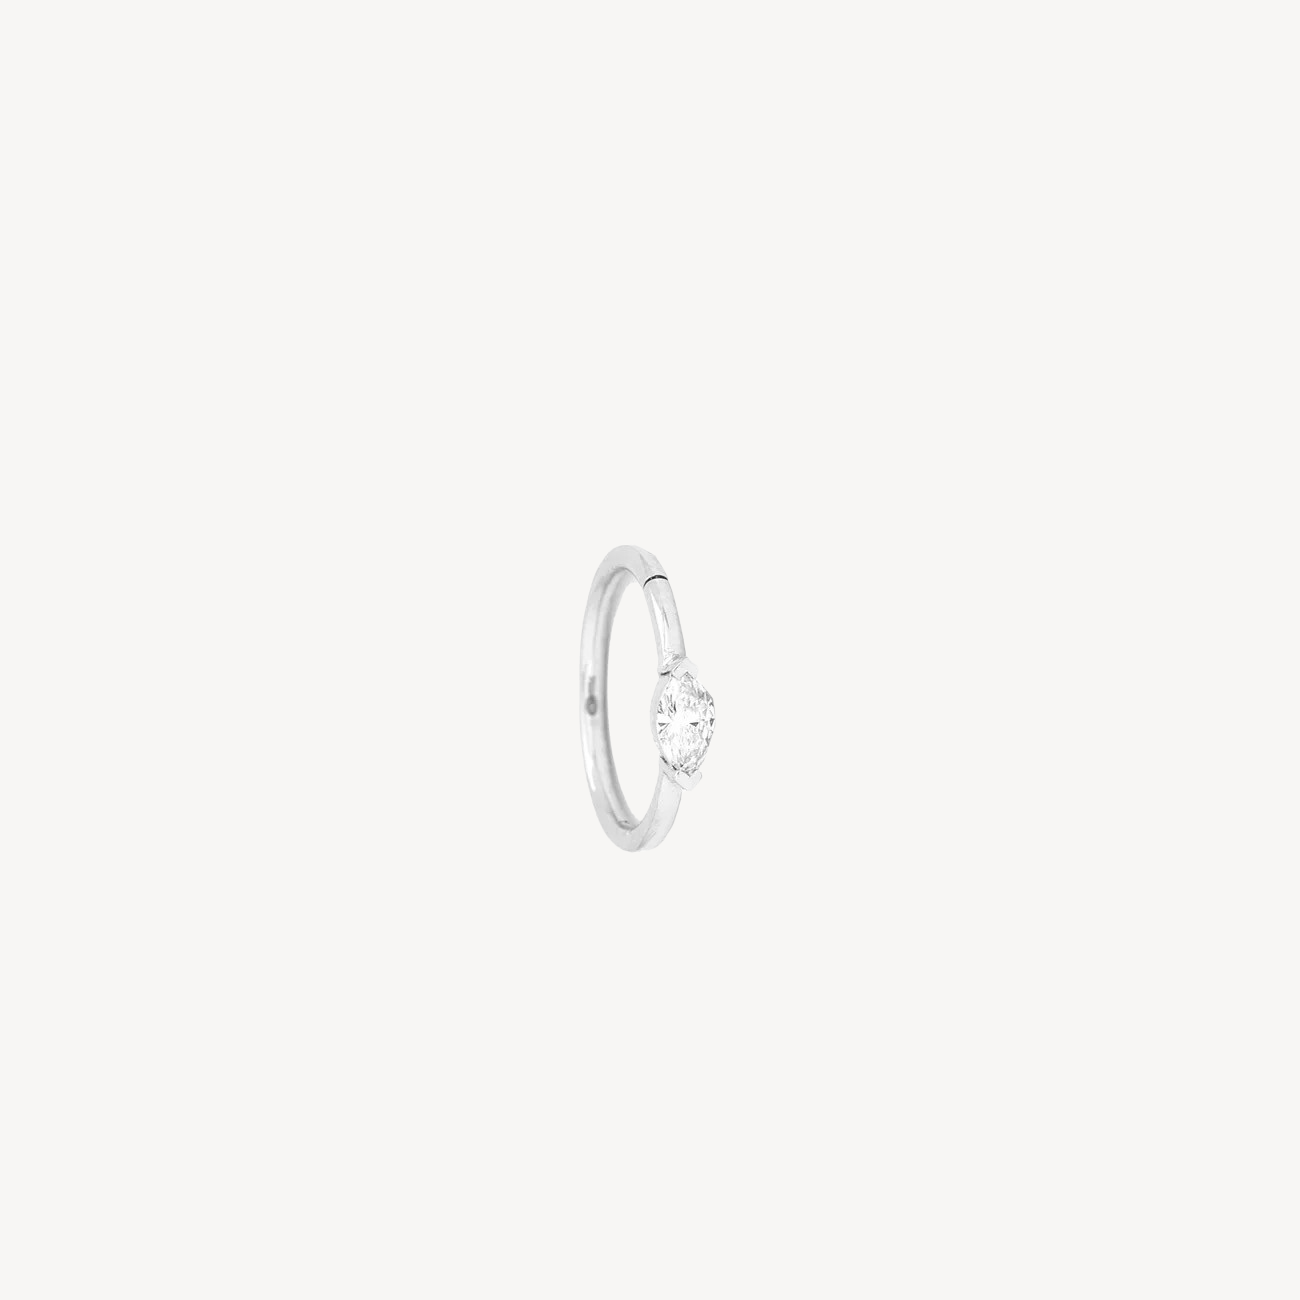 11mm Marquise 4.5x2mm Diamonds White Gold Hoop